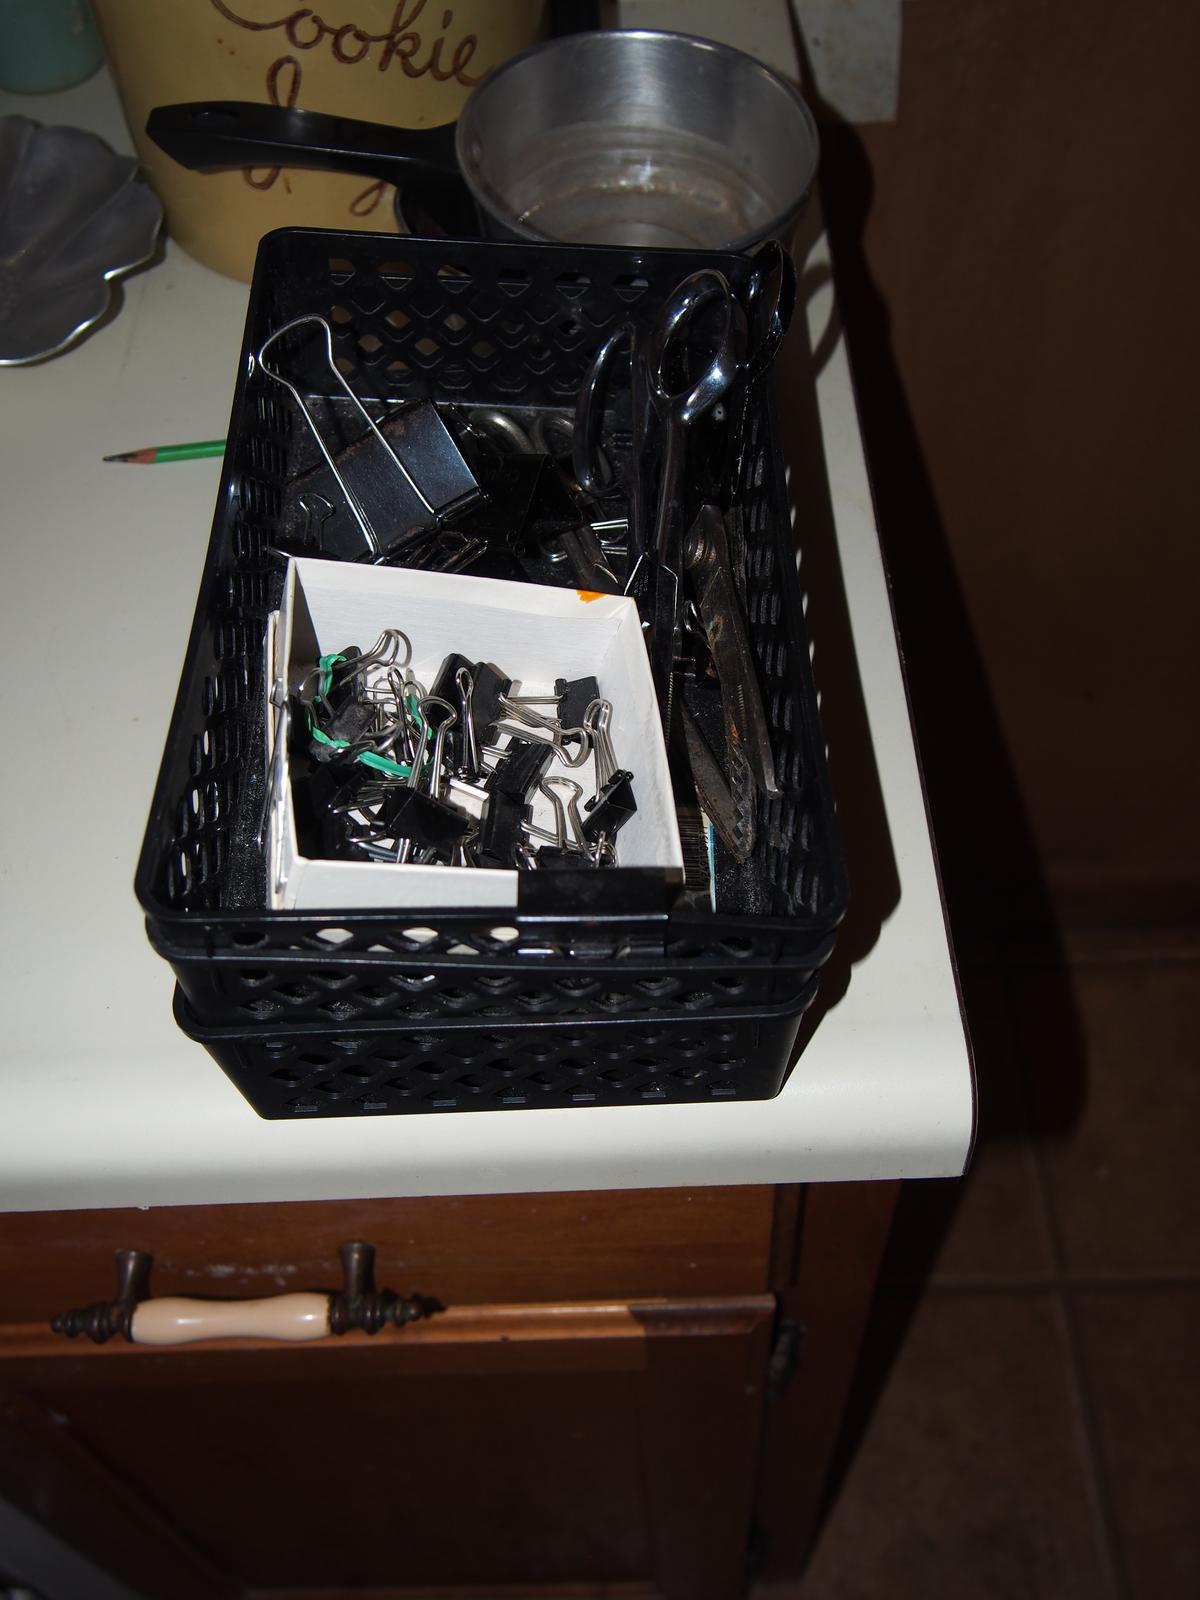 Plastic baskets and contents